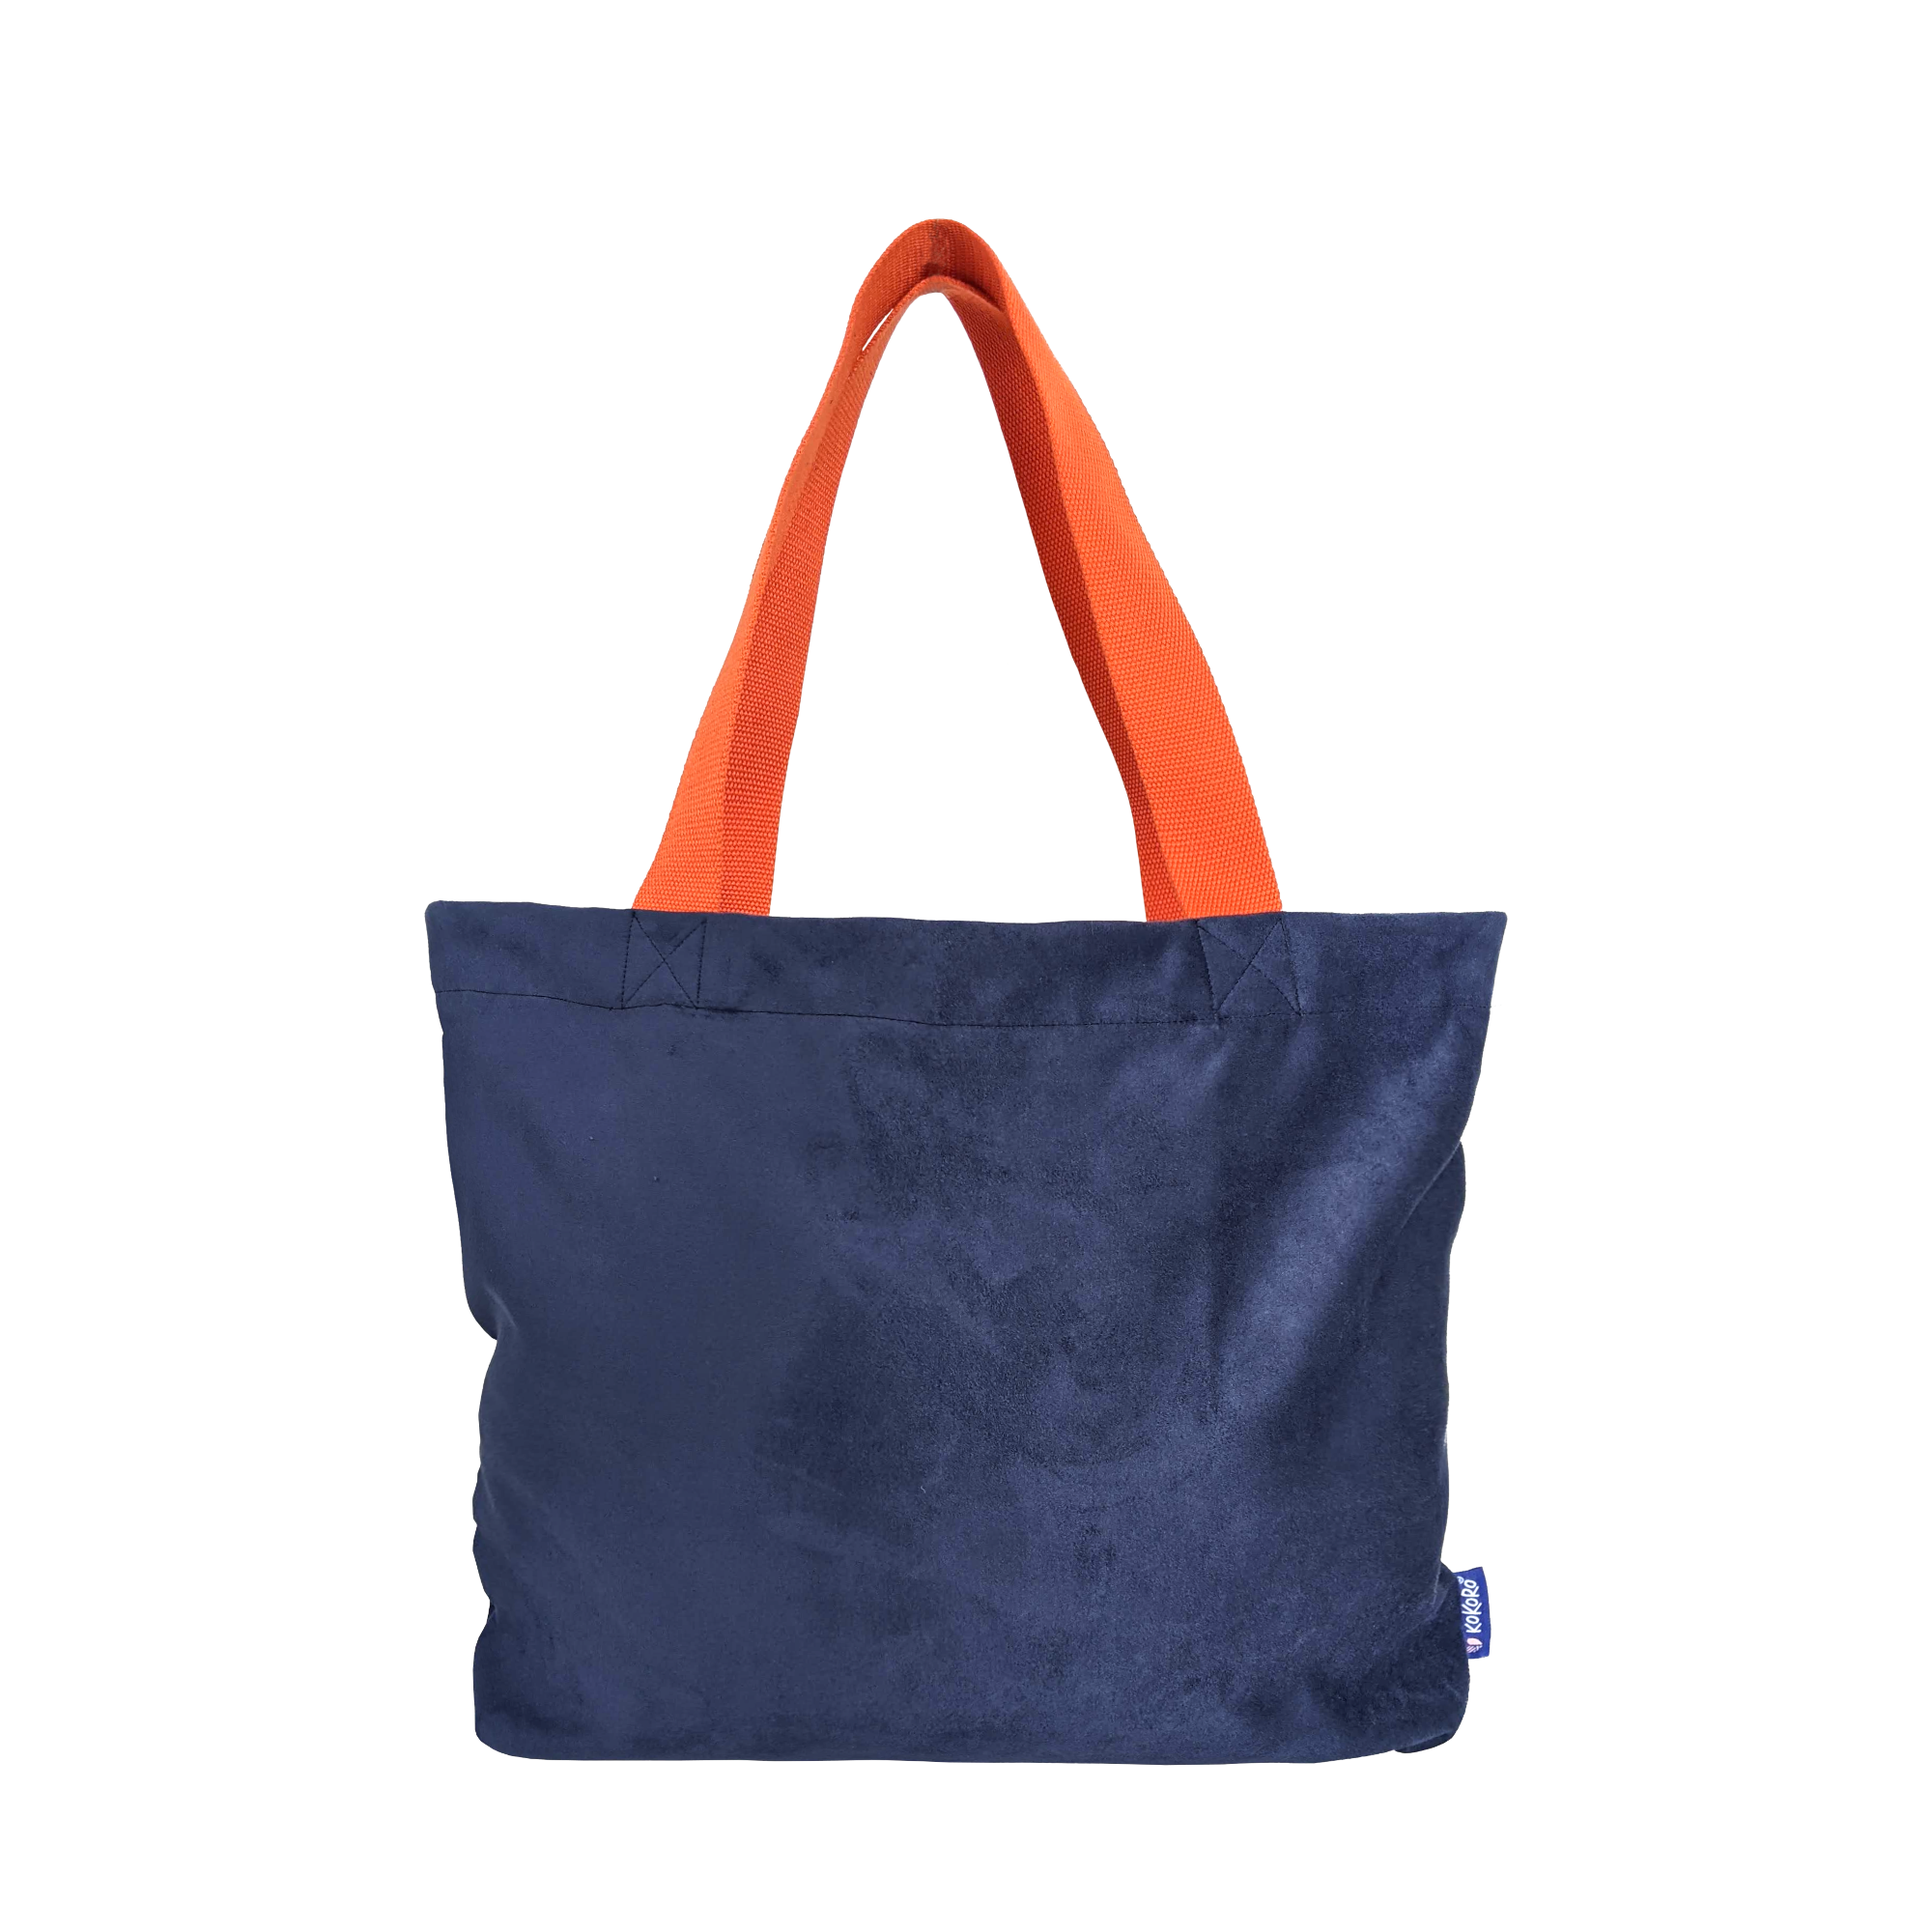 The essential tote